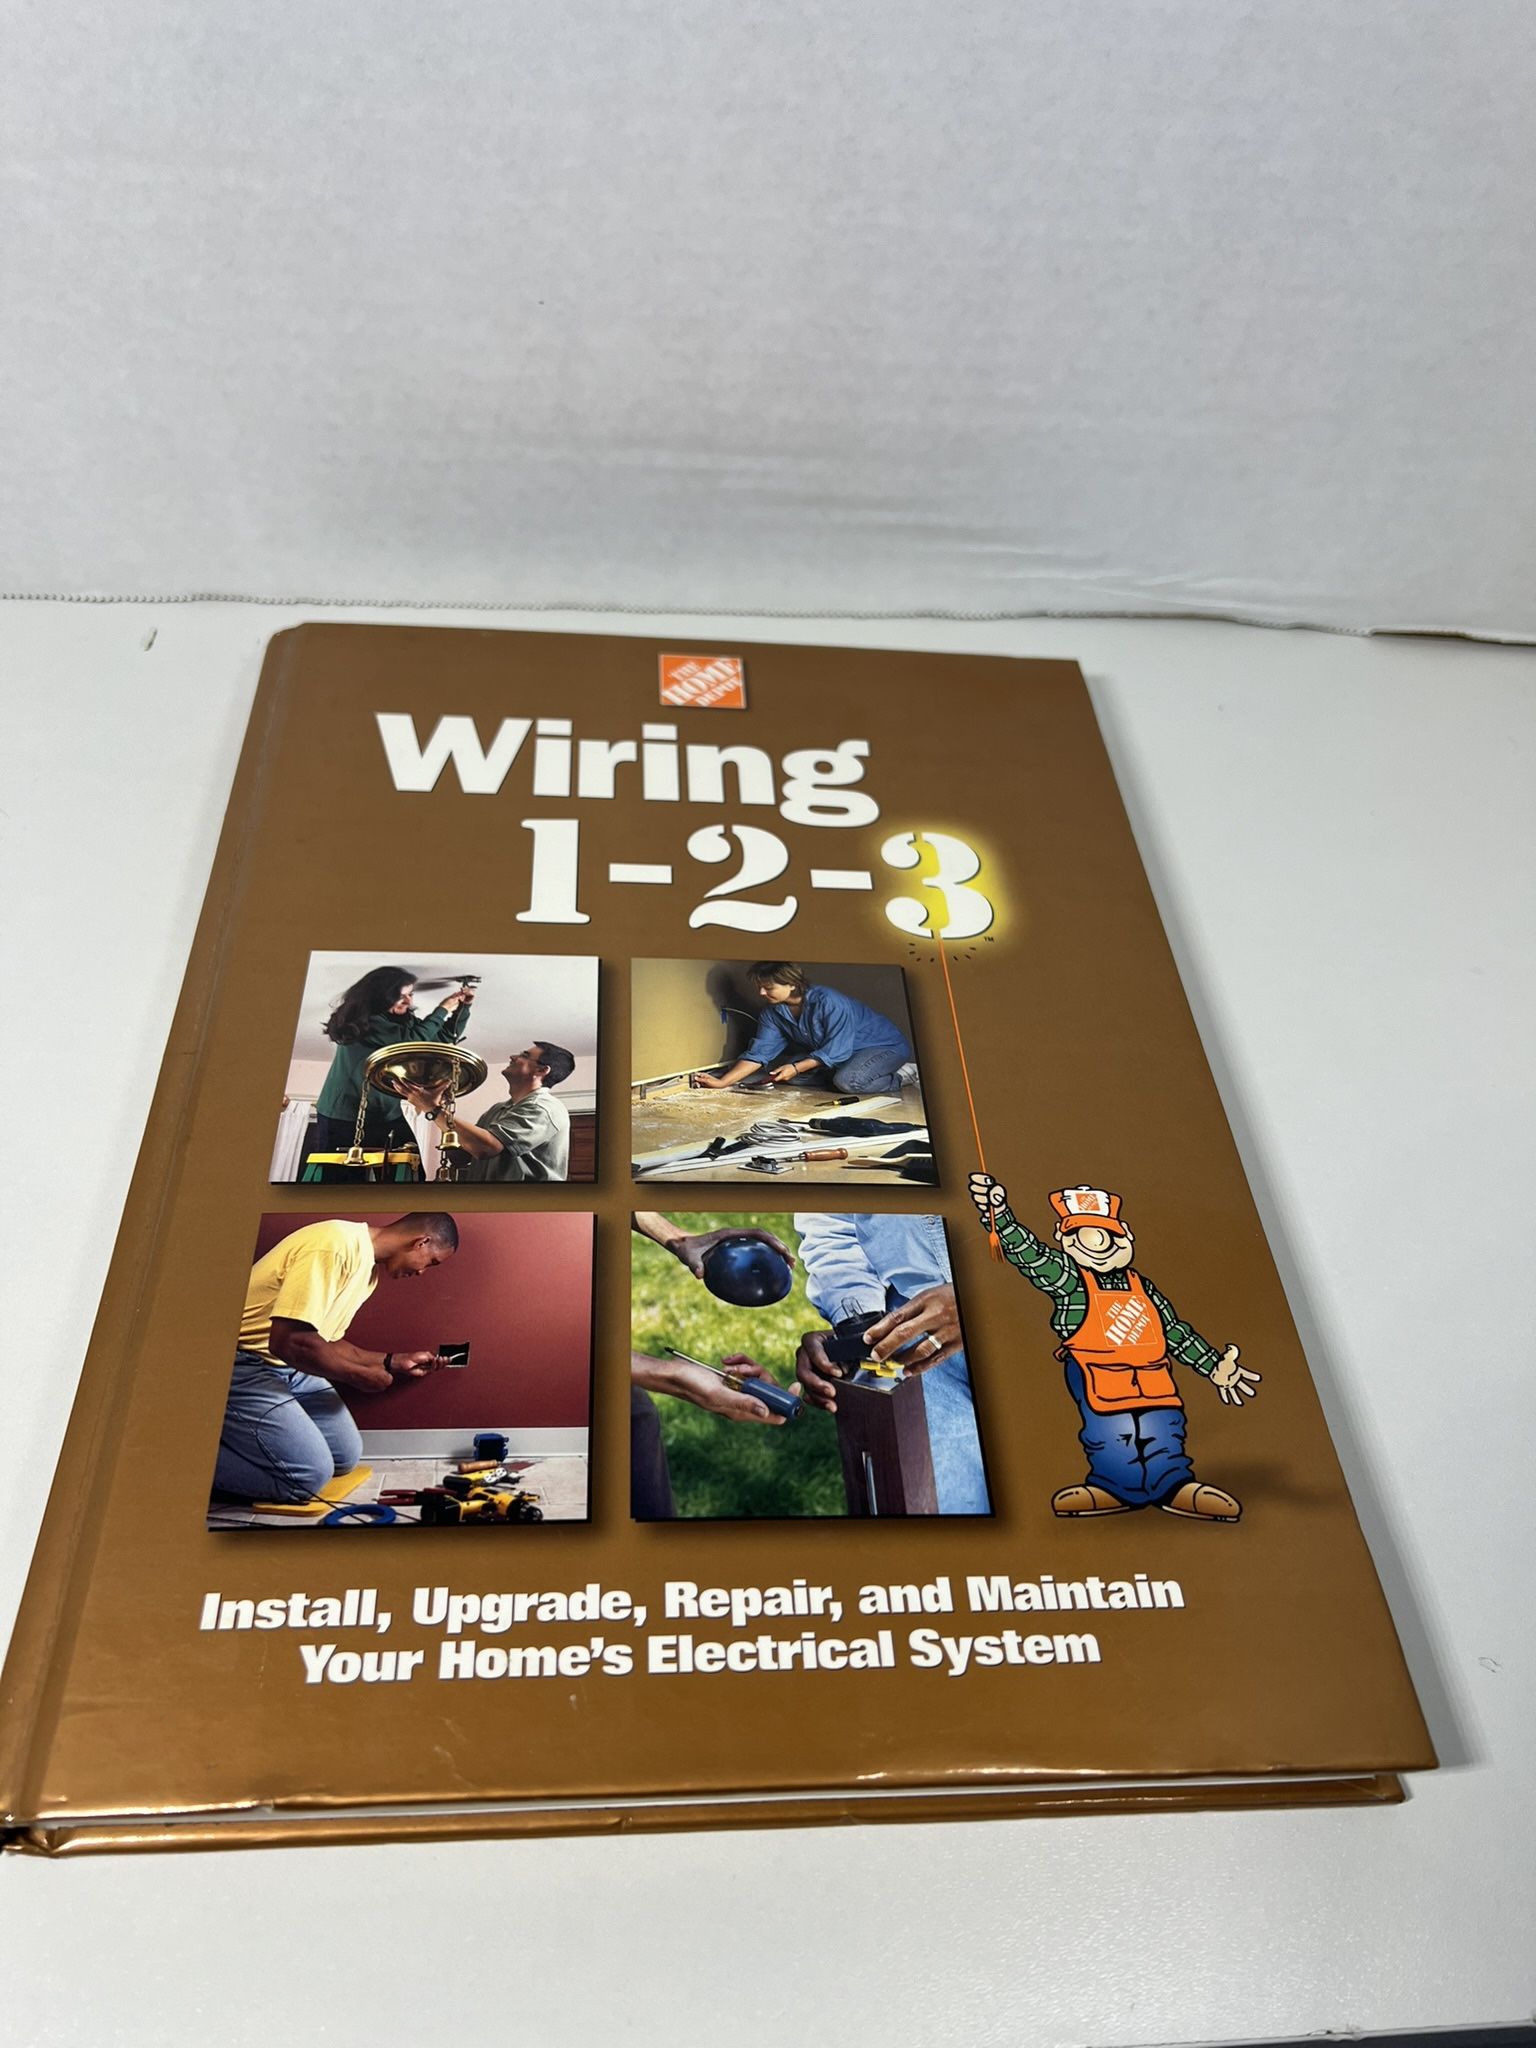 Wiring 1-2-3 Home Depot Hardcover Book